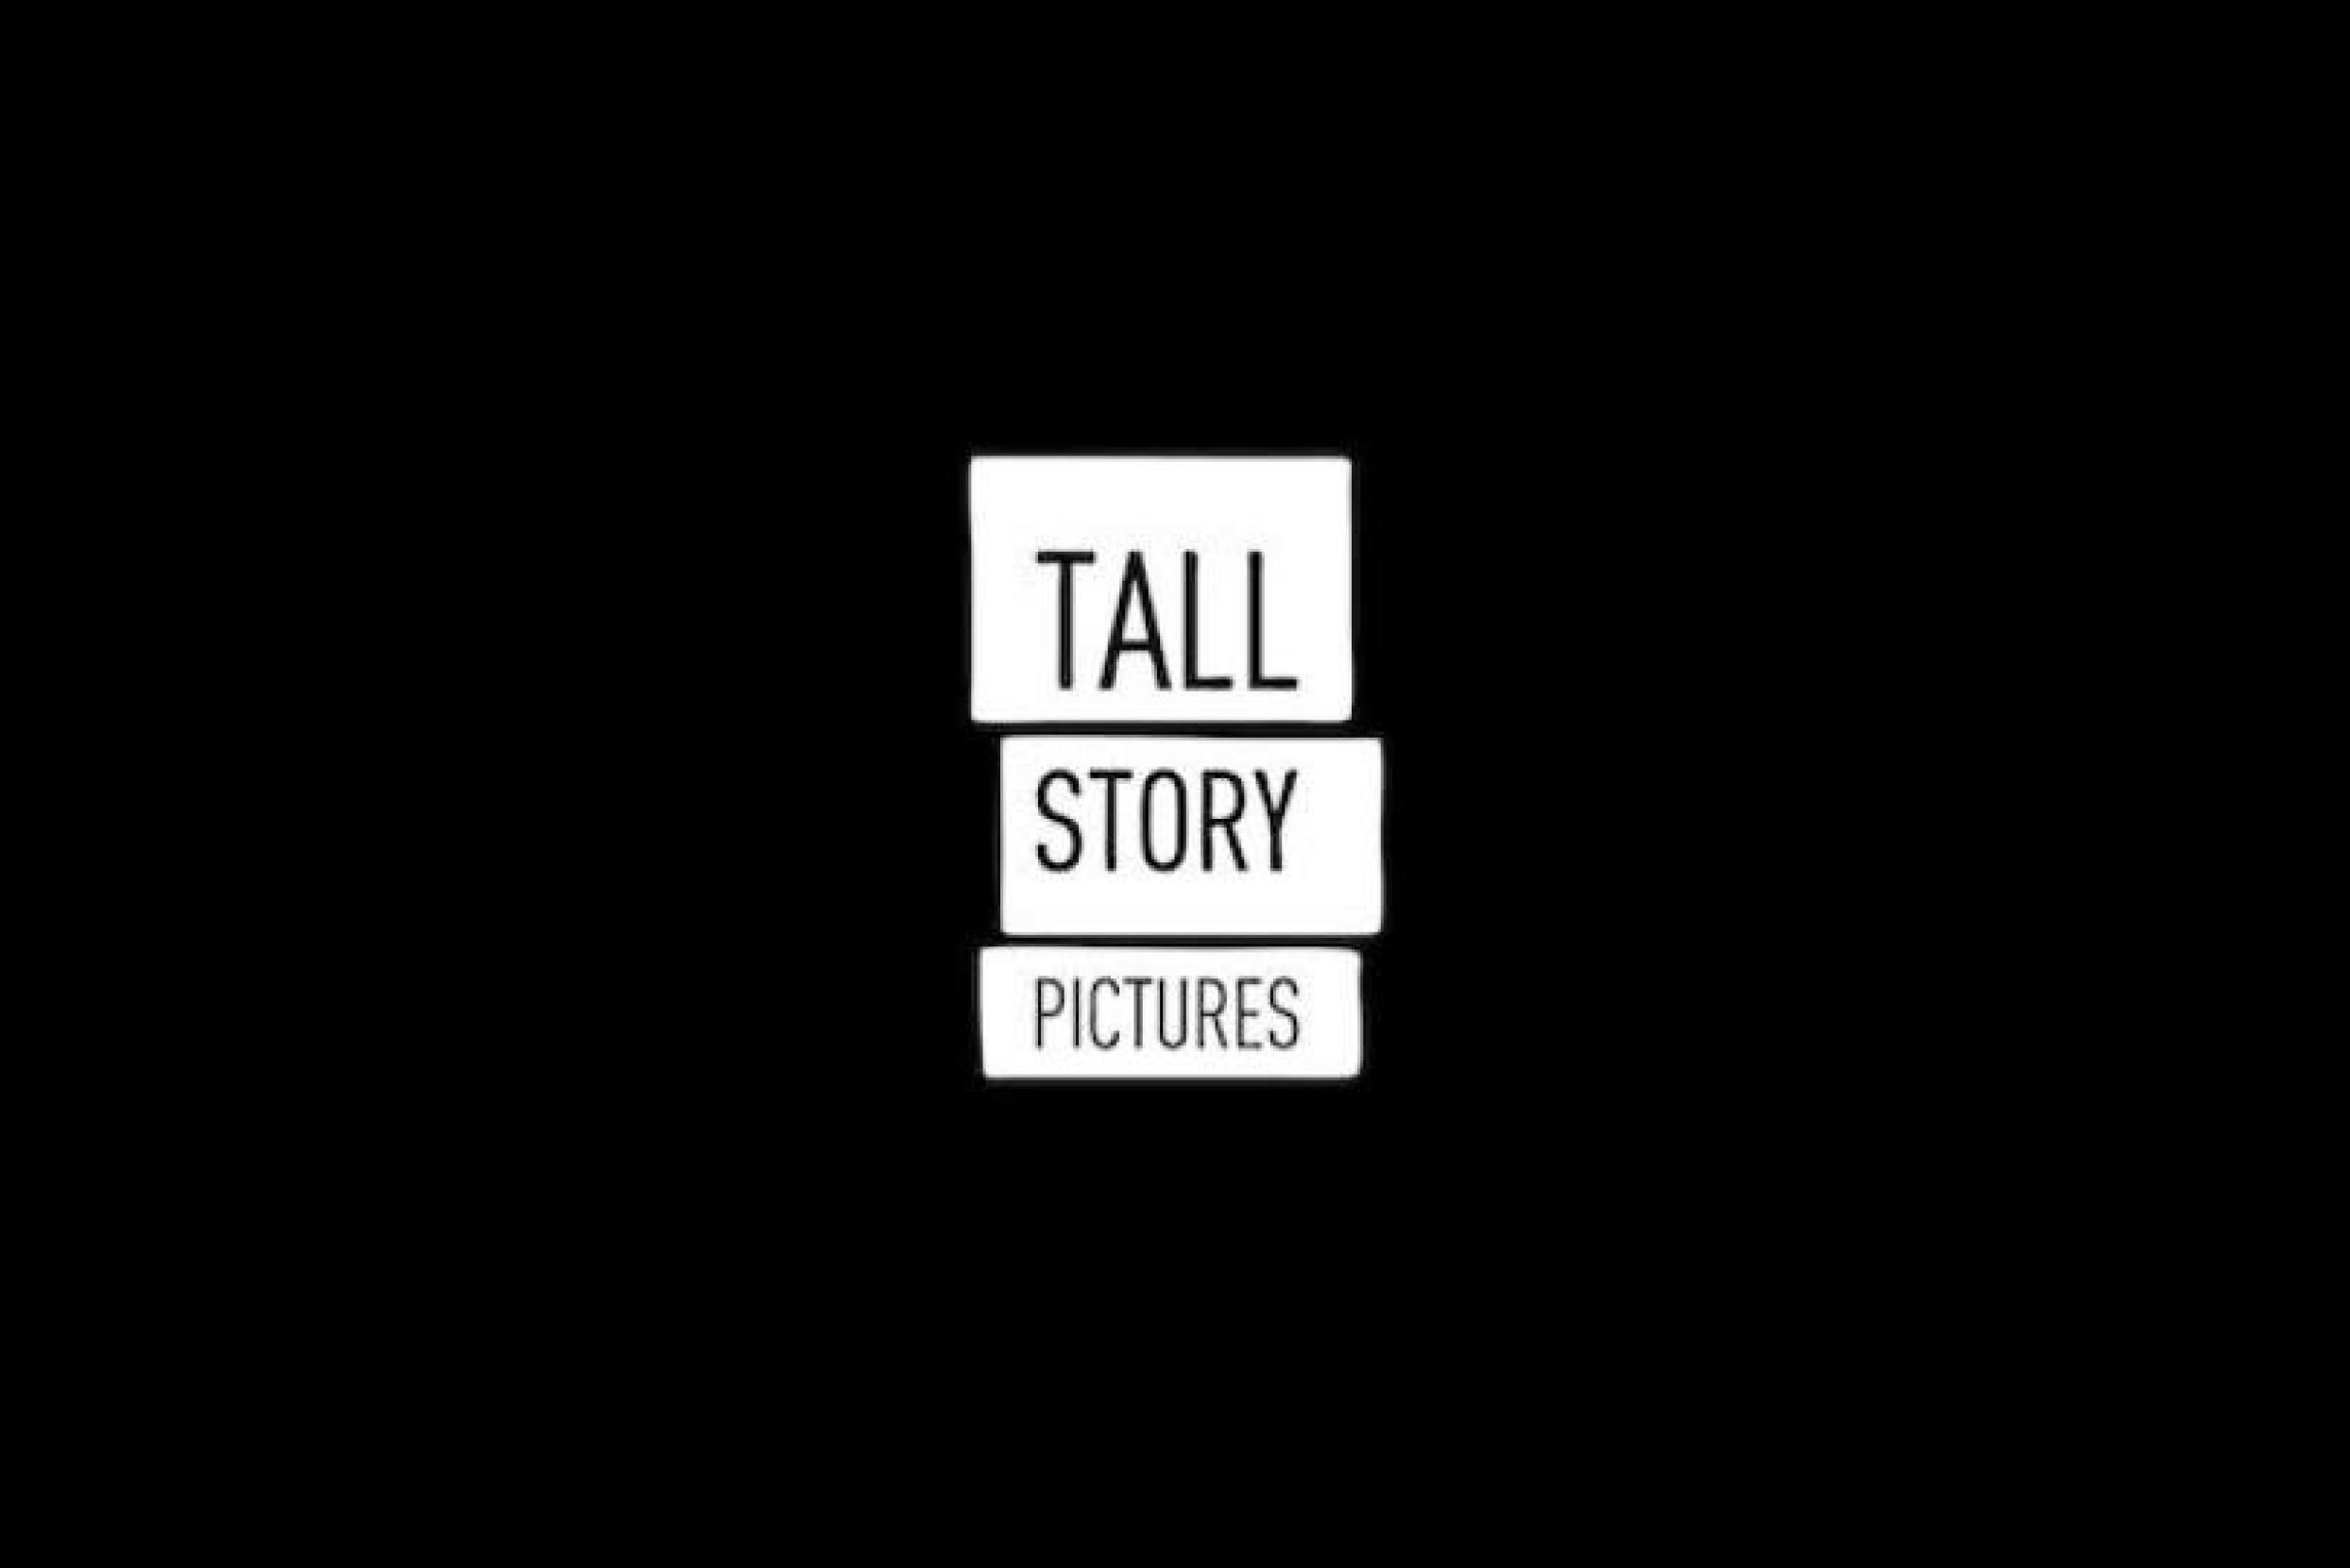 Tall Story Pictures appoints Phil Hunter as Executive Producer